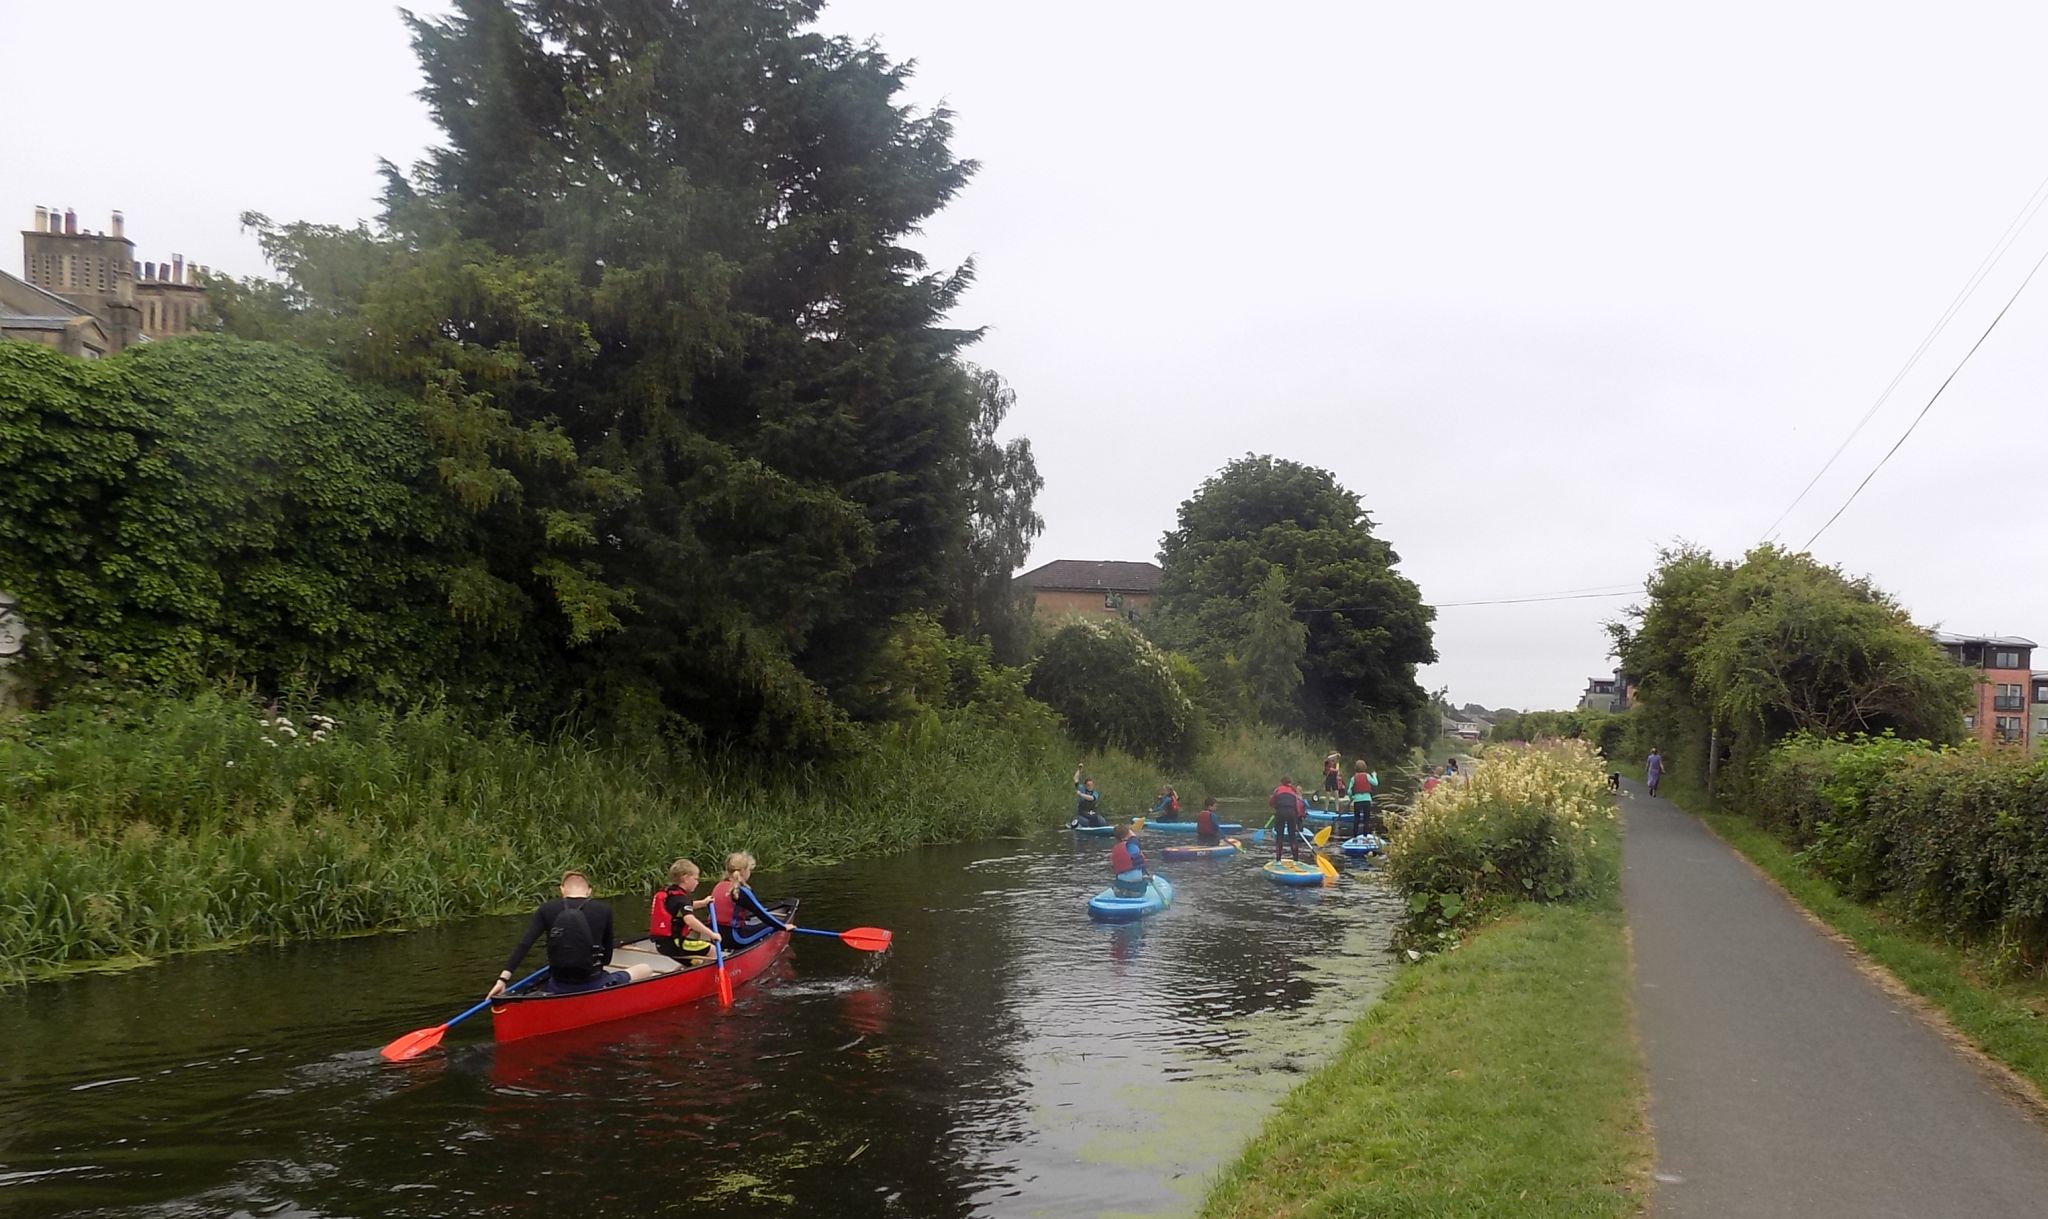 Watersports on the Union Canal